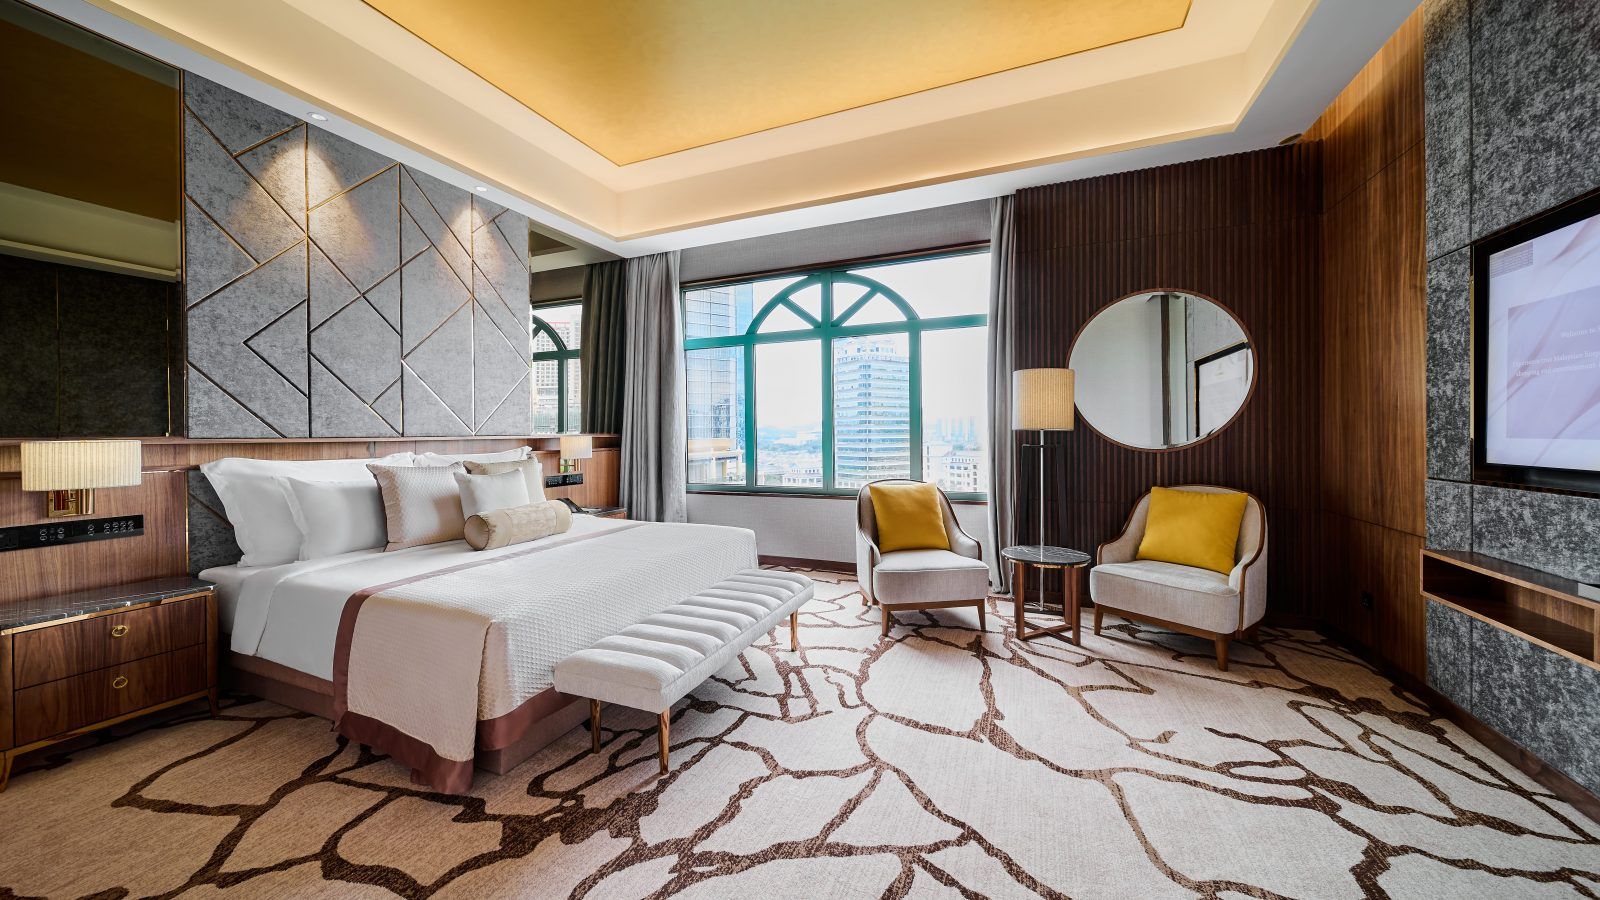 Kuala Lumpur’s Sunway Resort unveils the first phase of its transformation